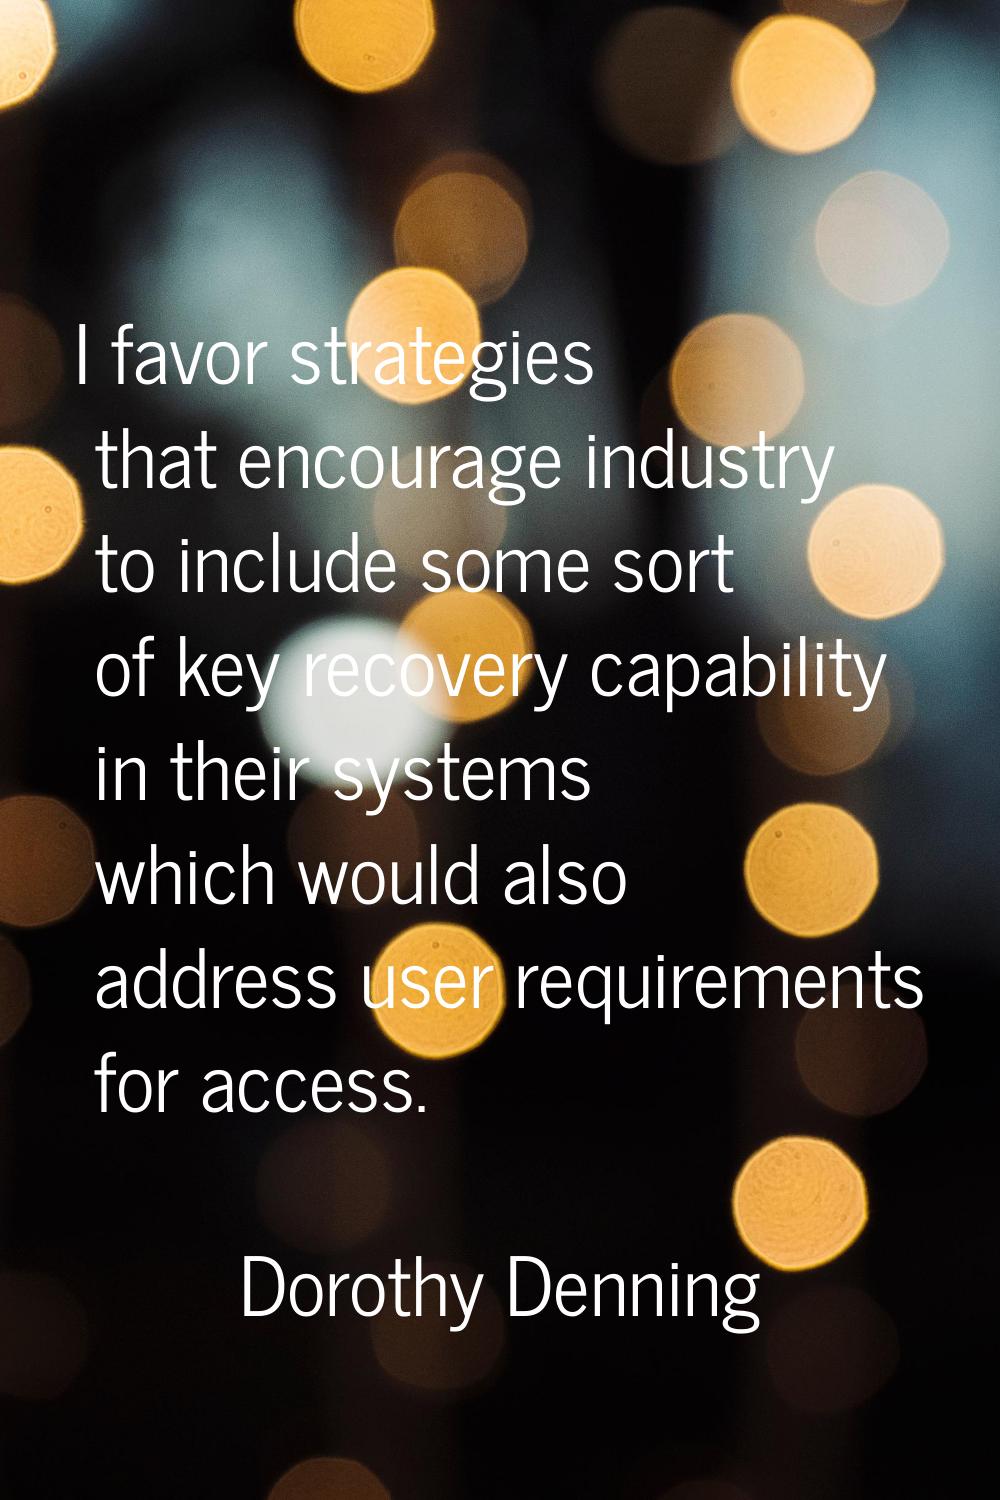 I favor strategies that encourage industry to include some sort of key recovery capability in their